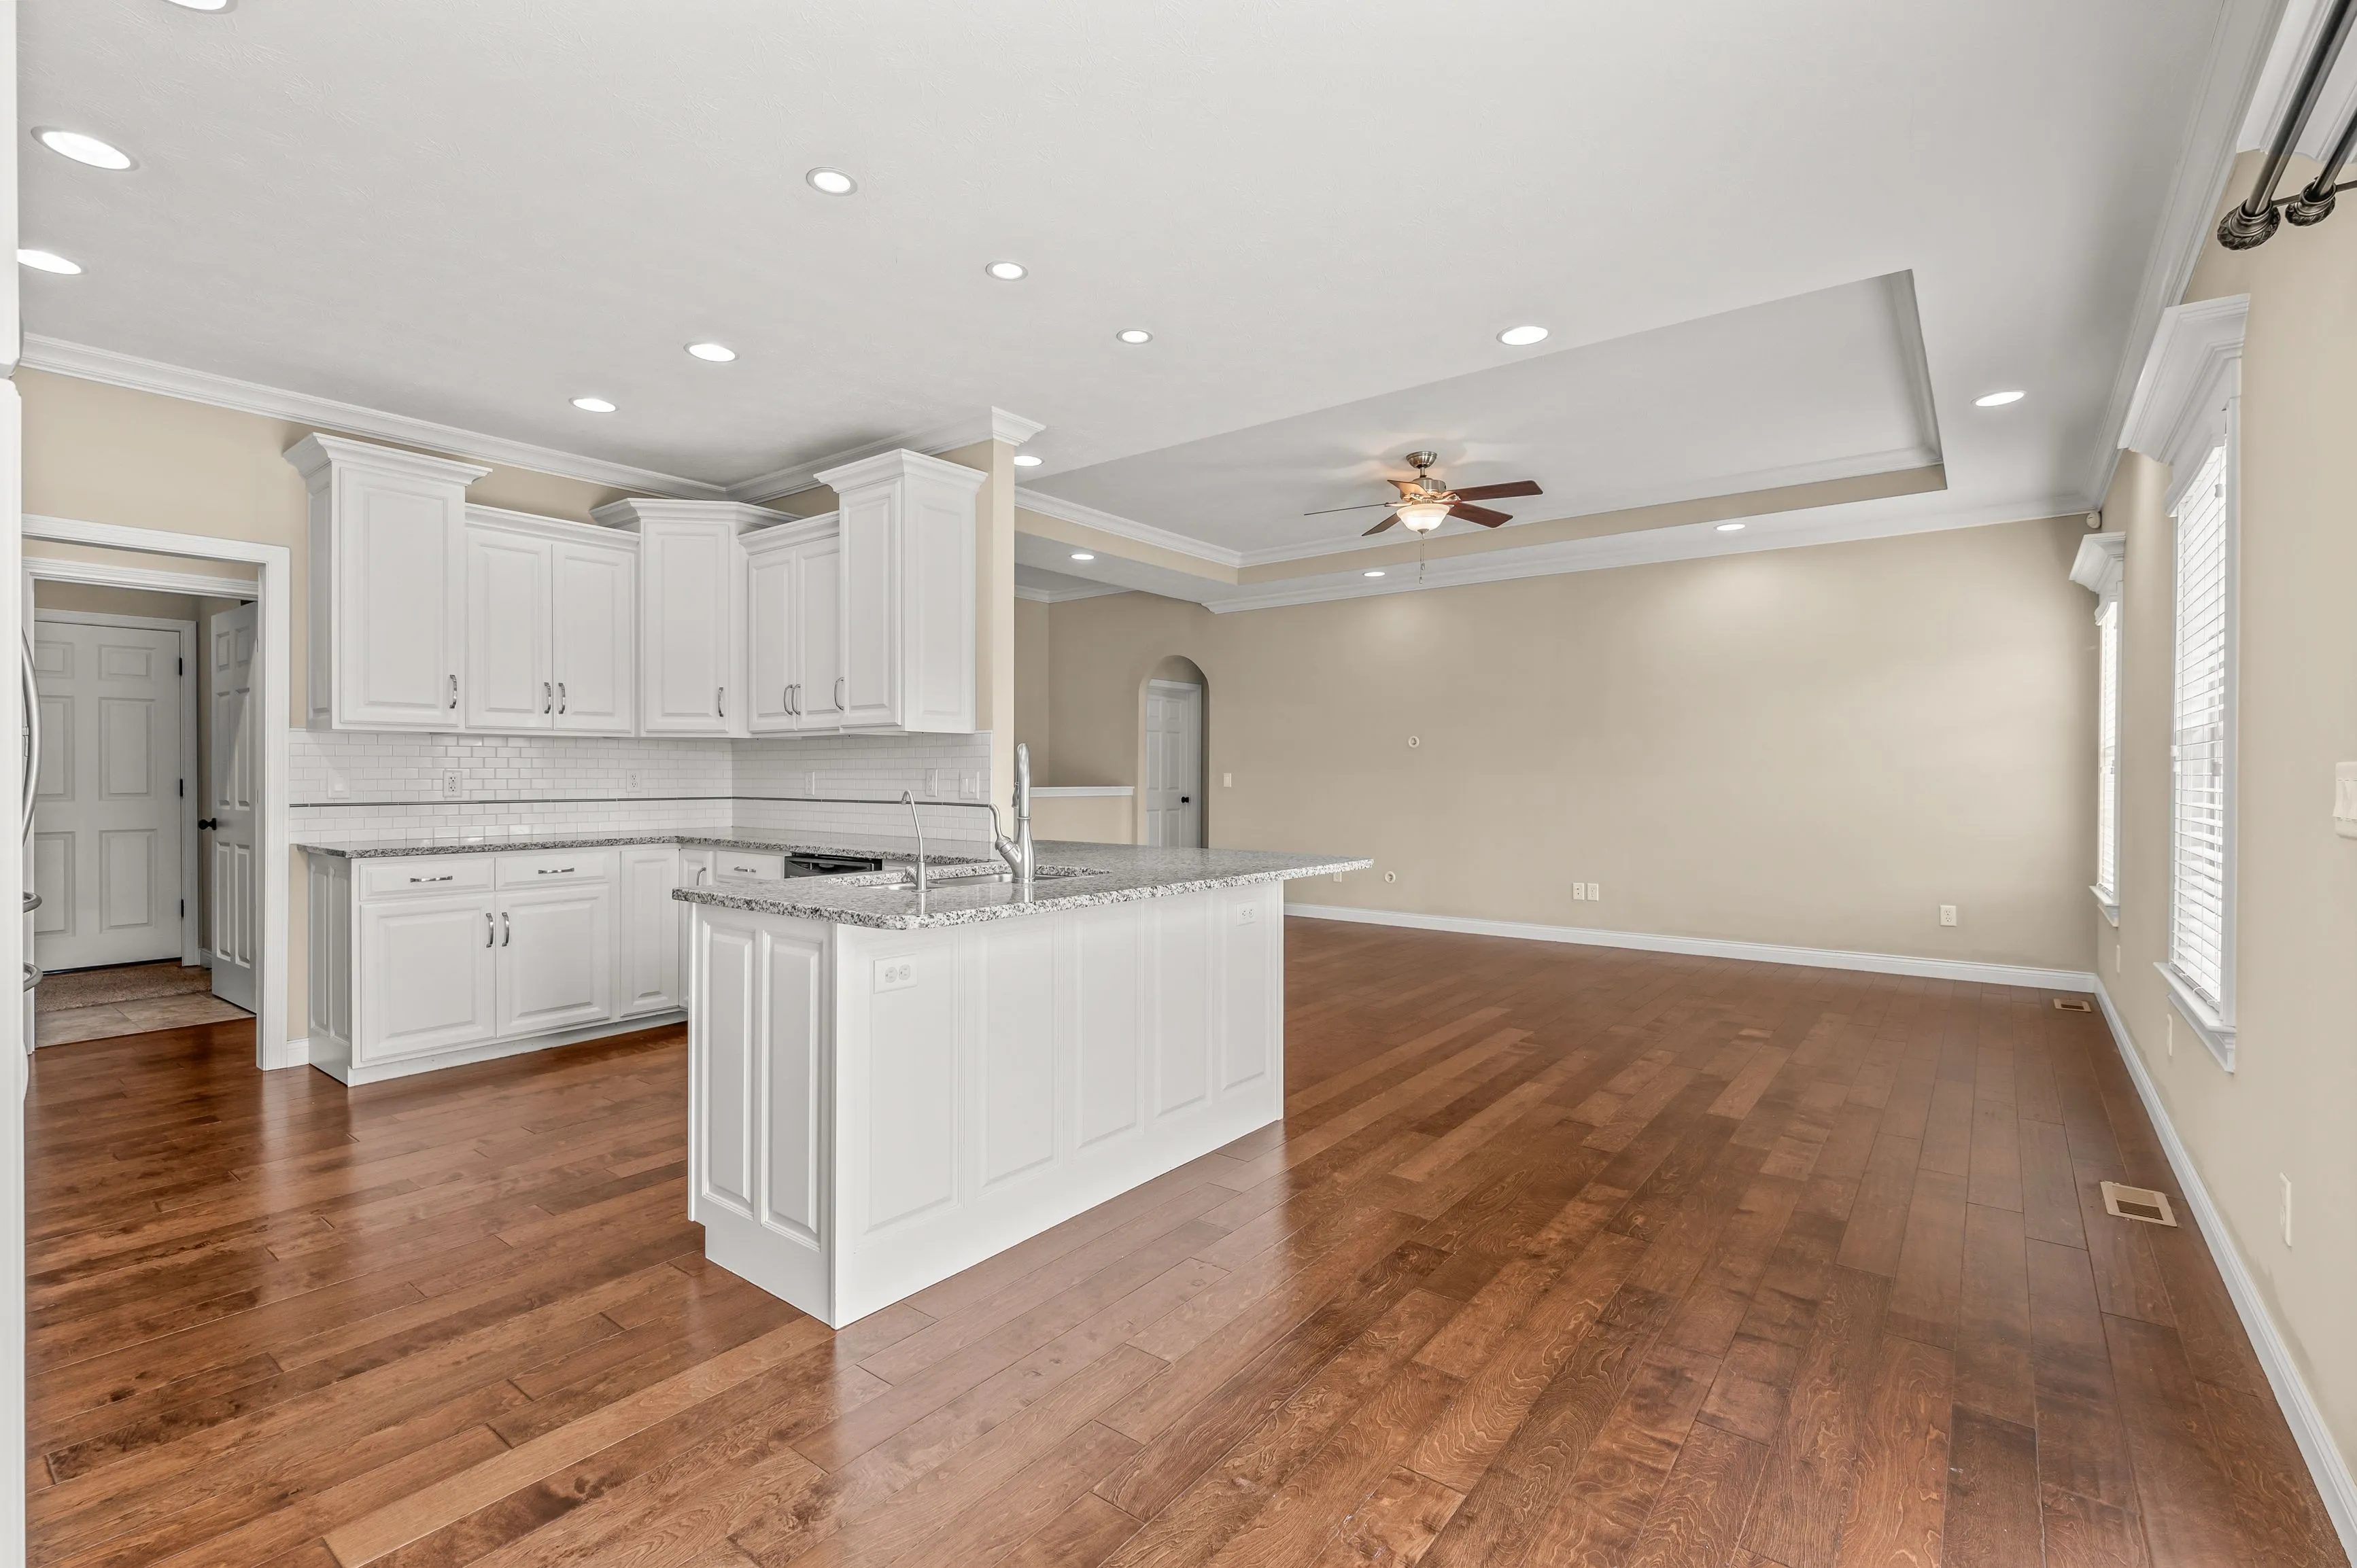 Spacious kitchen interior with hardwood floors, white cabinetry, and central island in a modern home.